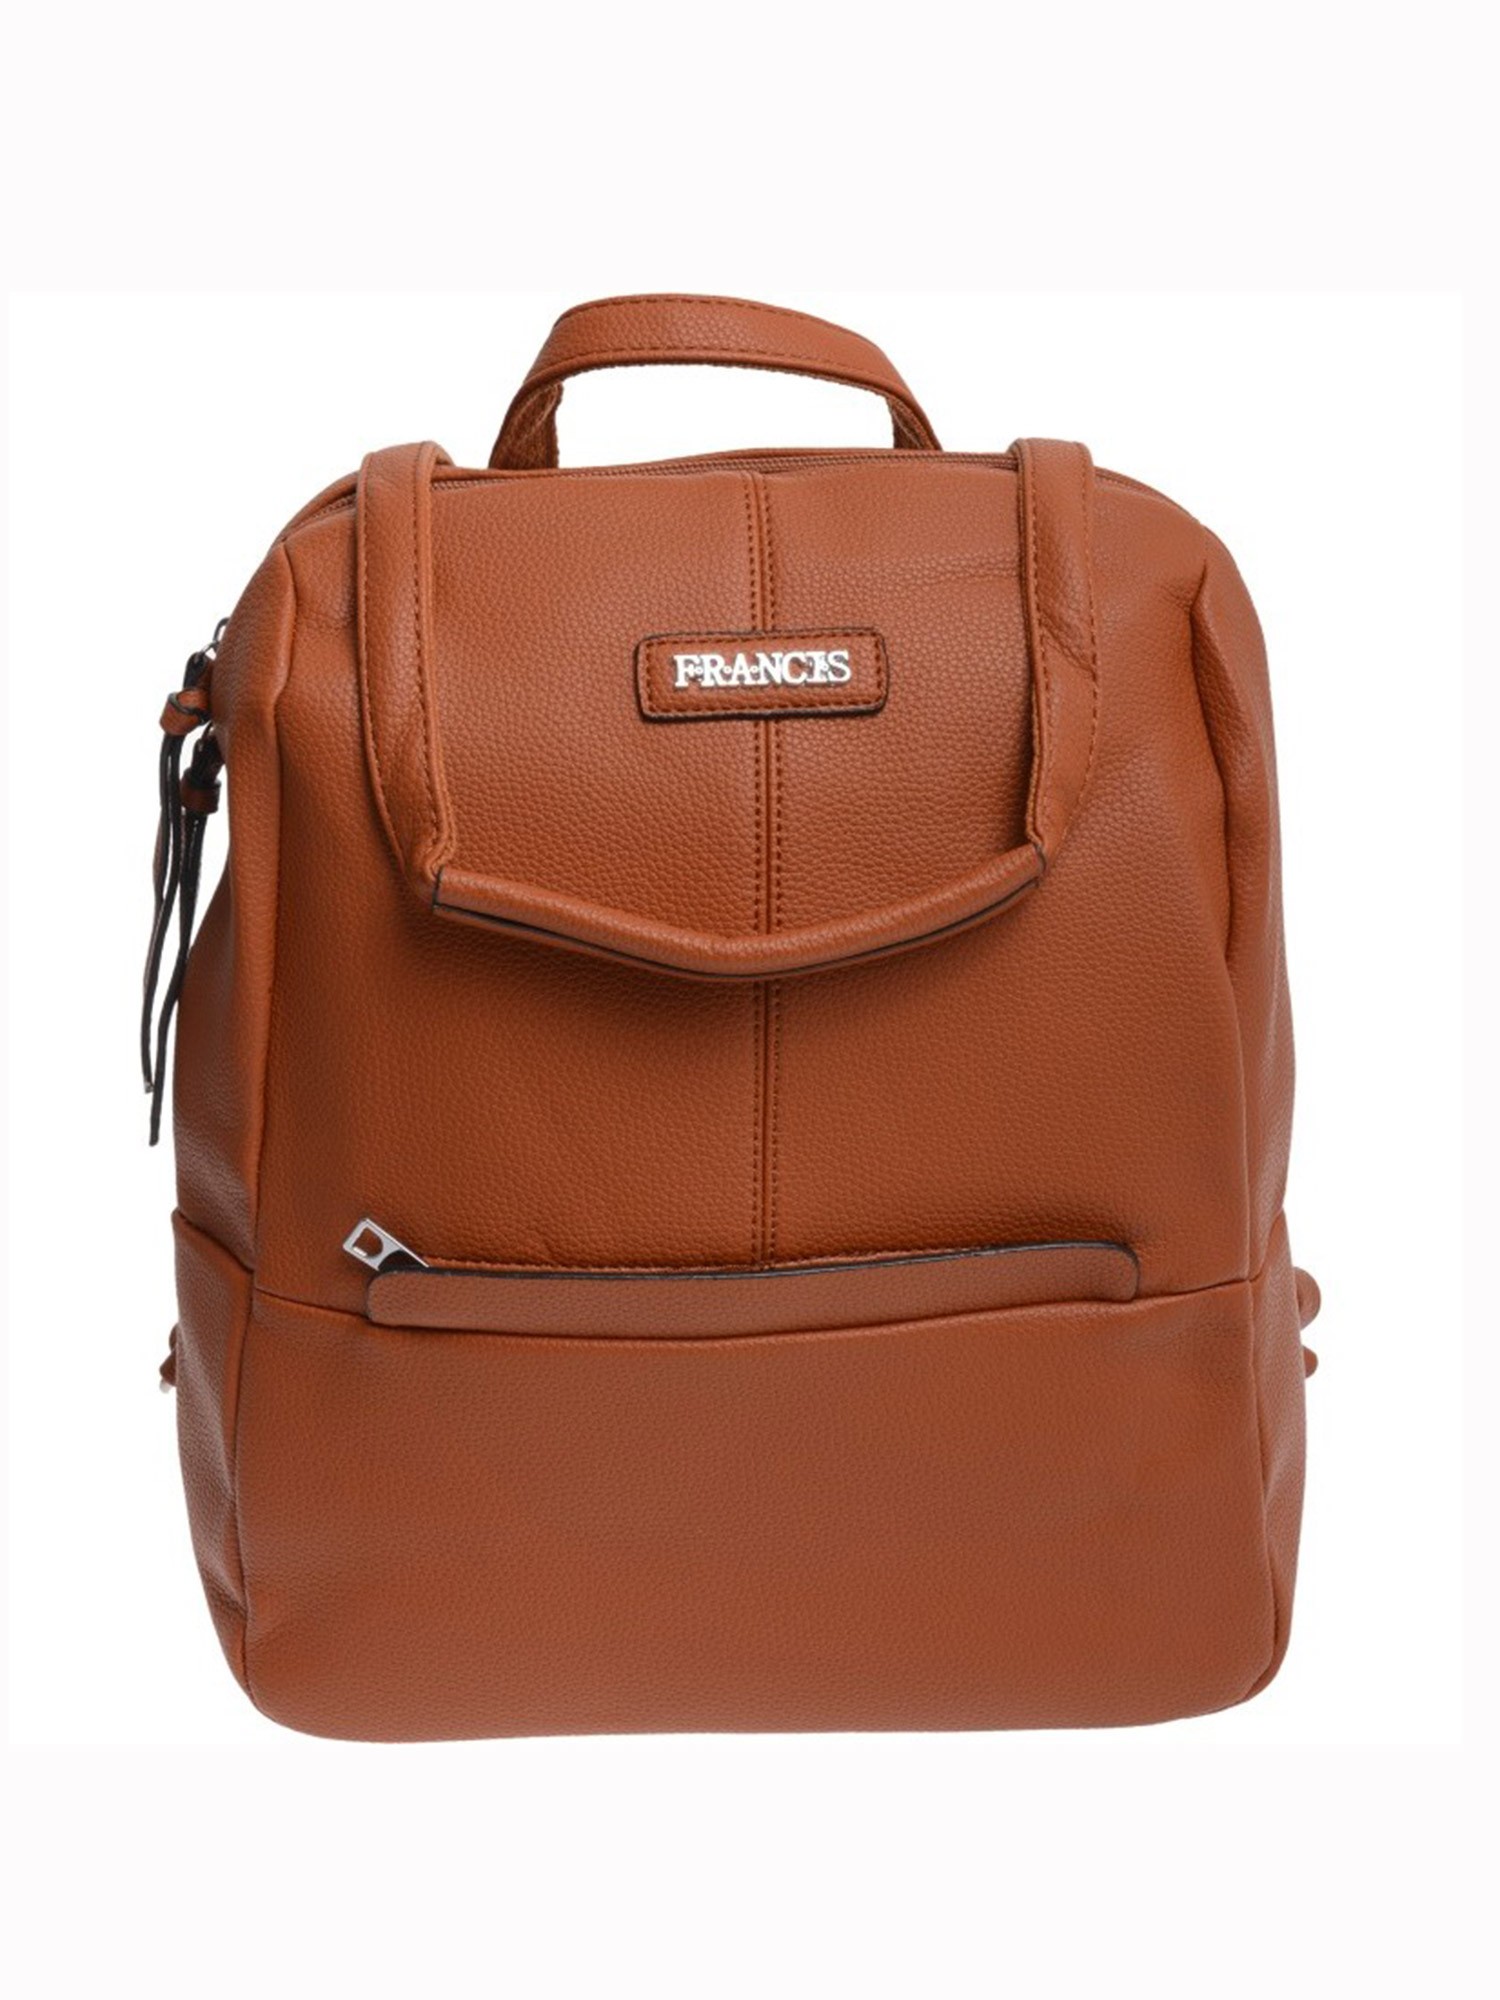 Light brown women's backpack with adjustable straps